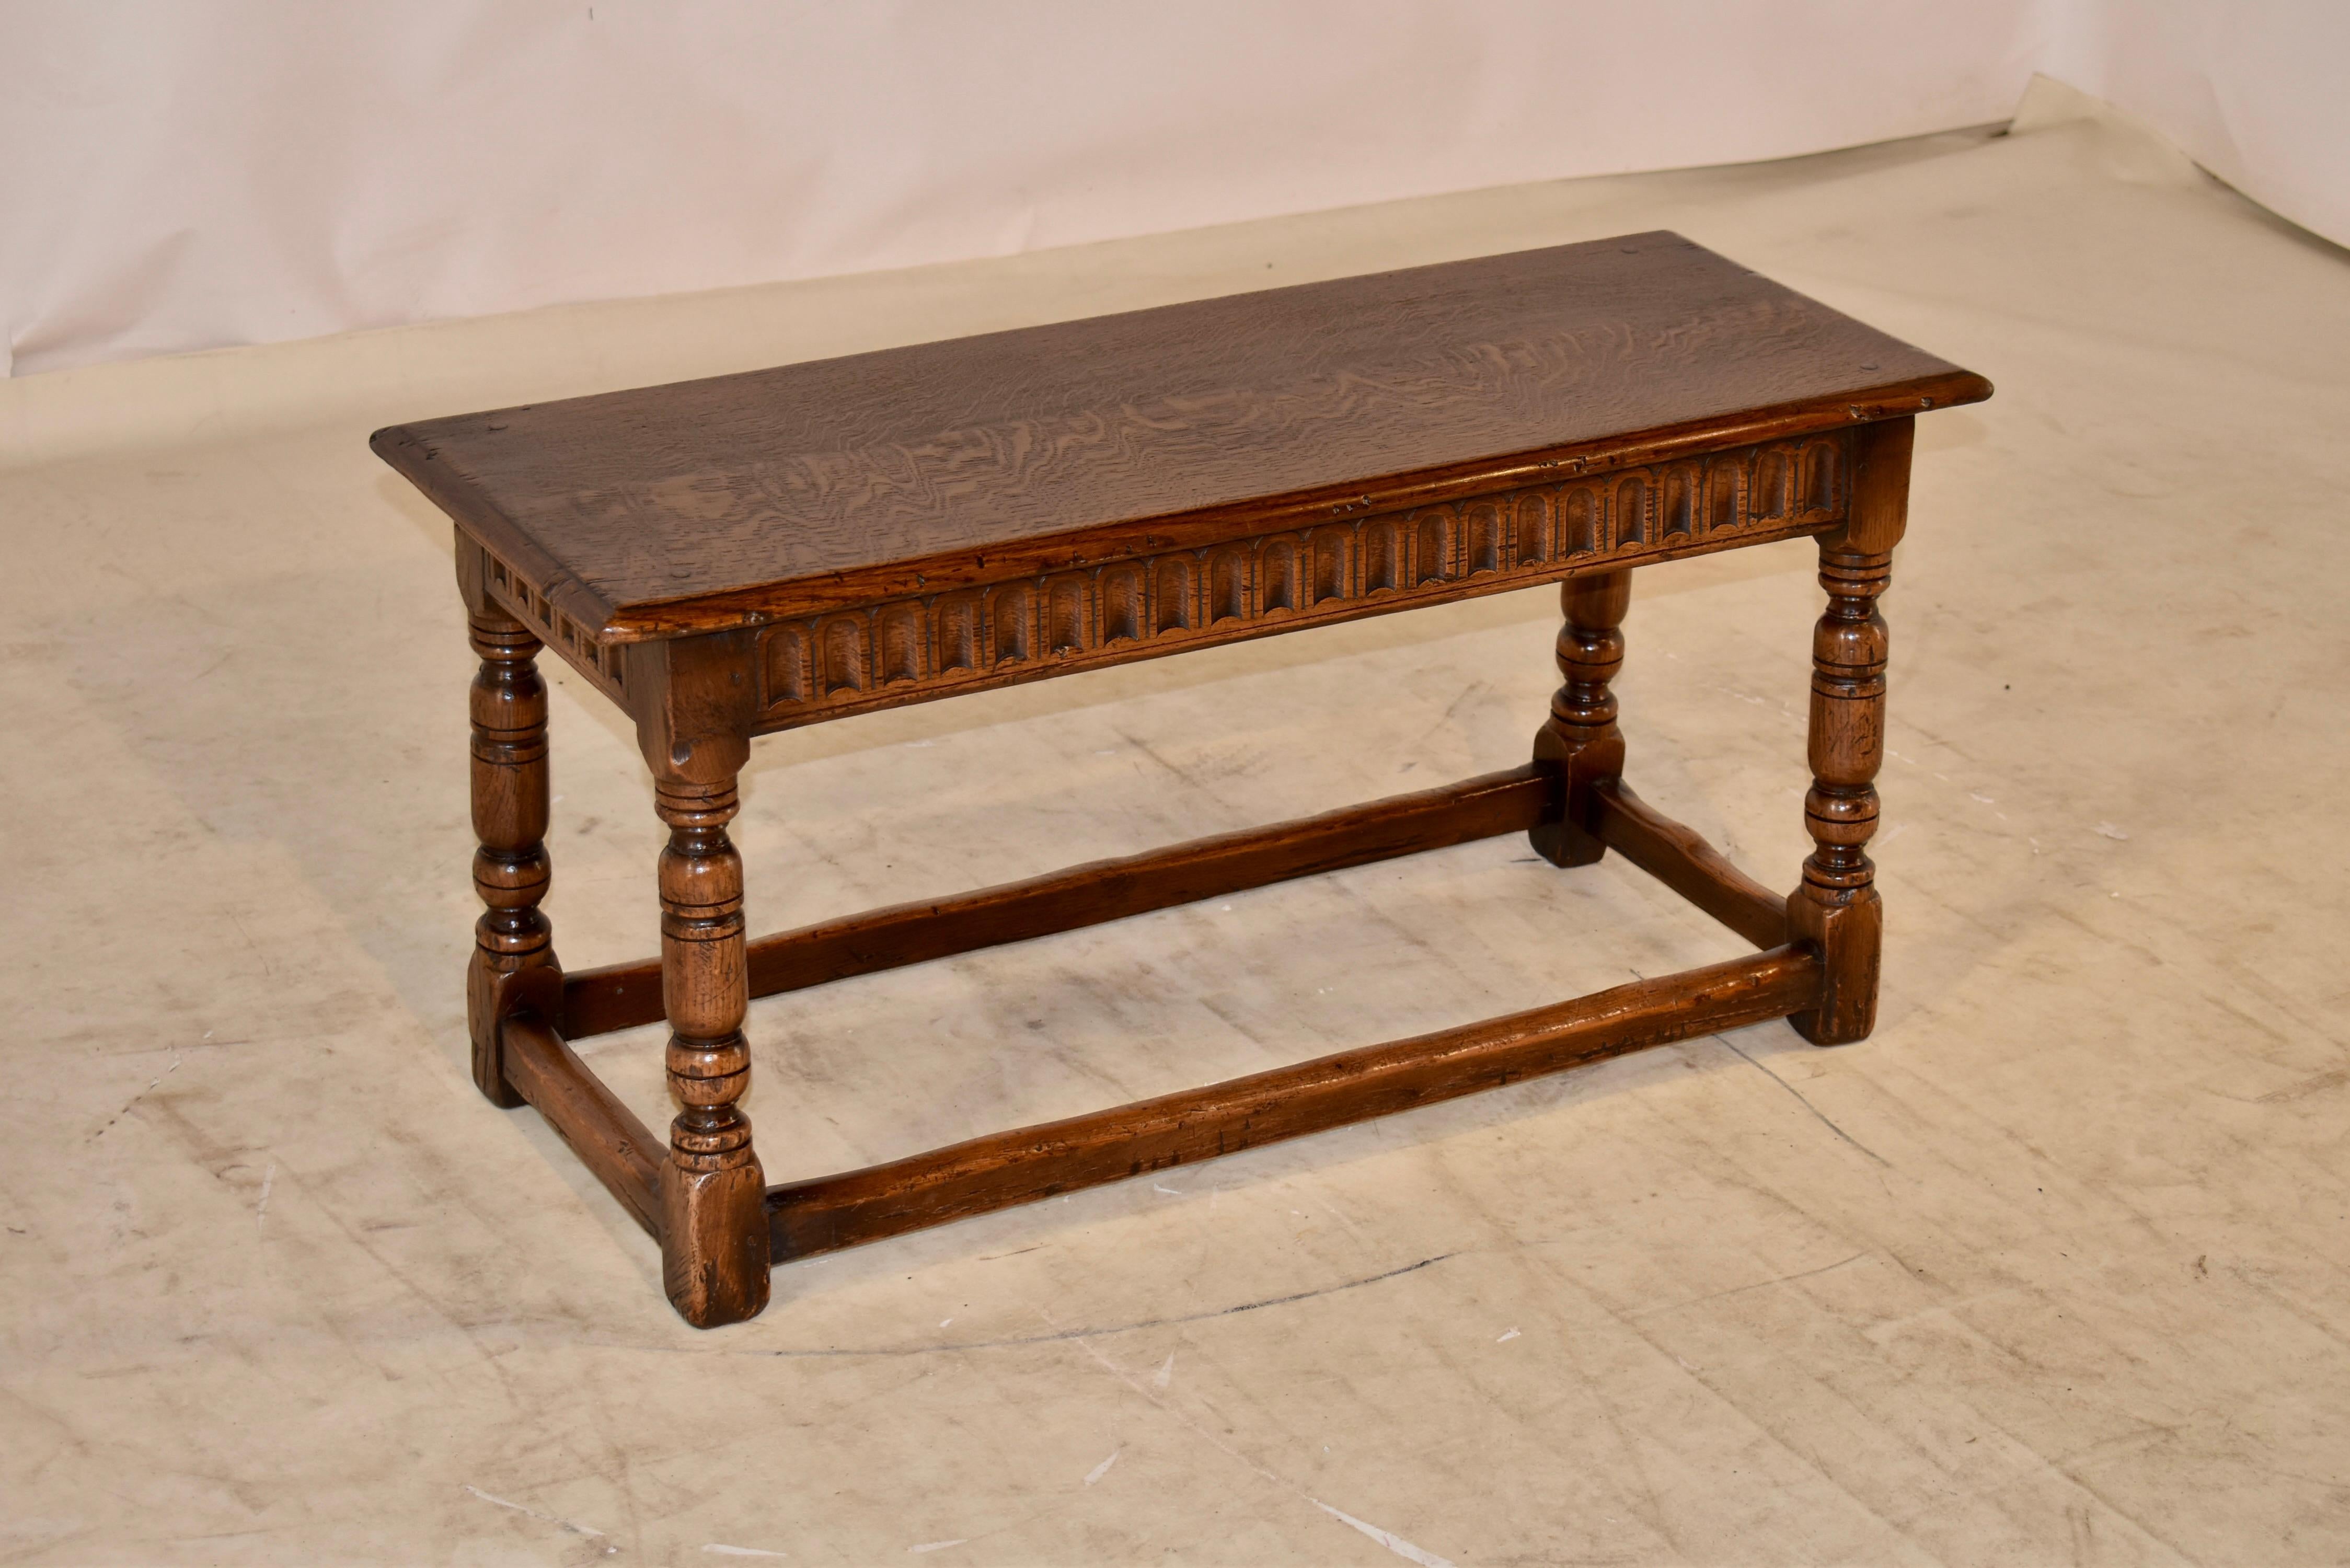 19th century oak joint bench from England with a two plank top which has a beveled edge over a lovely hand carved apron. the piece is supported on hand turned legs, joined by simple stretchers. Lovely piece in a wonderful size.